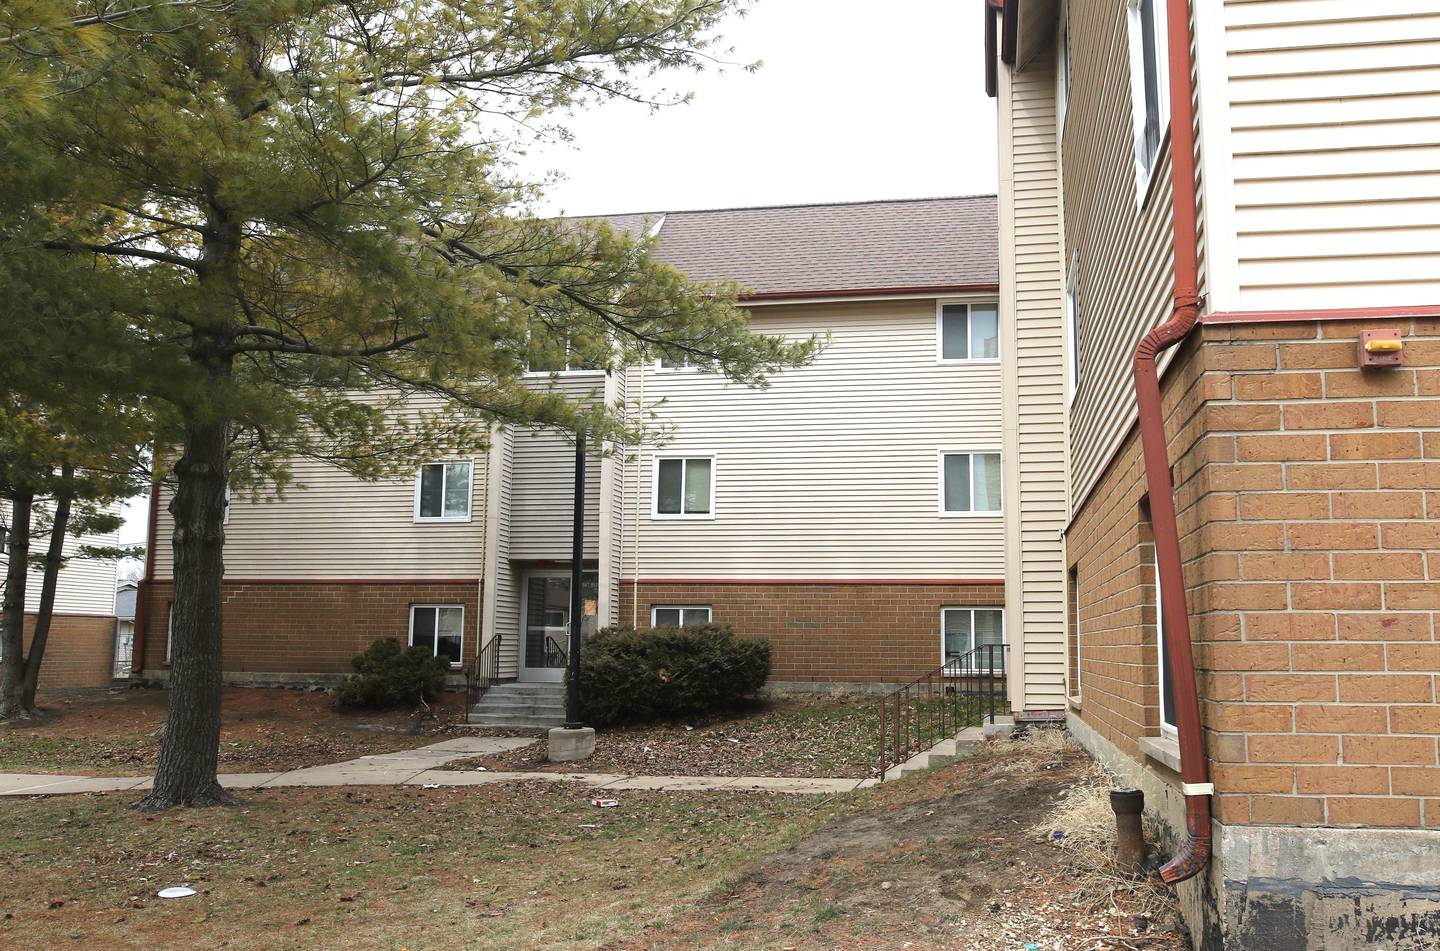 The University Village apartment building at 847 Russell Road in DeKalb where a man was fatally shot in the parking lot Sunday afternoon. Romel A. Hollingsworth Jr., 20, of the 800 block of Russell Road in DeKalb, was charged with first degree murder in the fatal shooting of 33-year-old Carl Austin, according to DeKalb County court records.